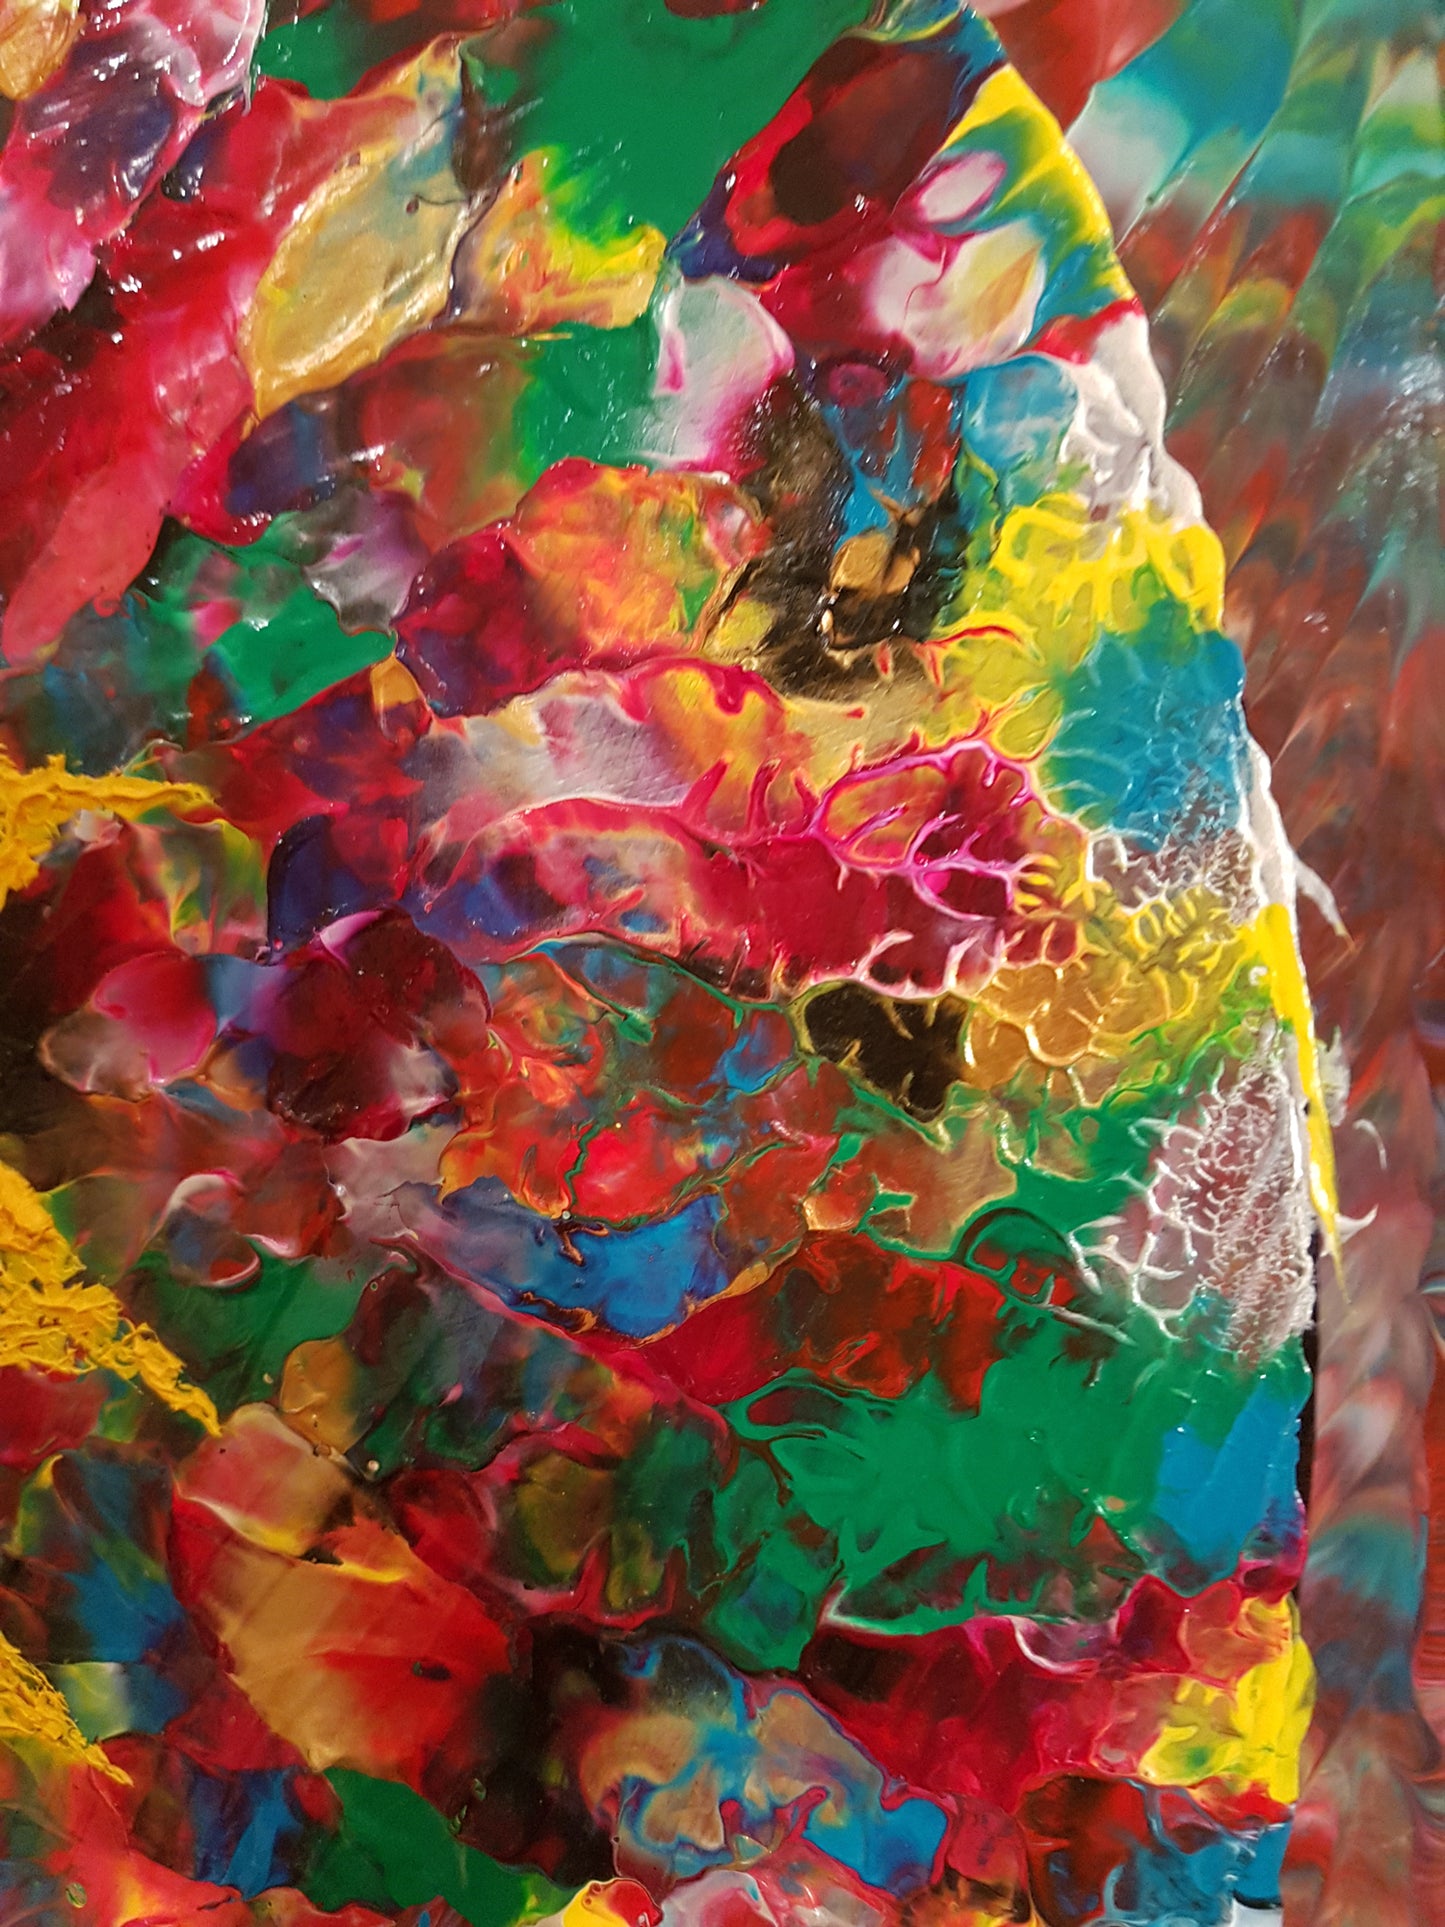 Psychedelic-Sunflower-by-Alexandra-Romano-Yellow-Red-Green-Colorful-Flower-Painting-Absract-Expressionism-Gallery-Toronto